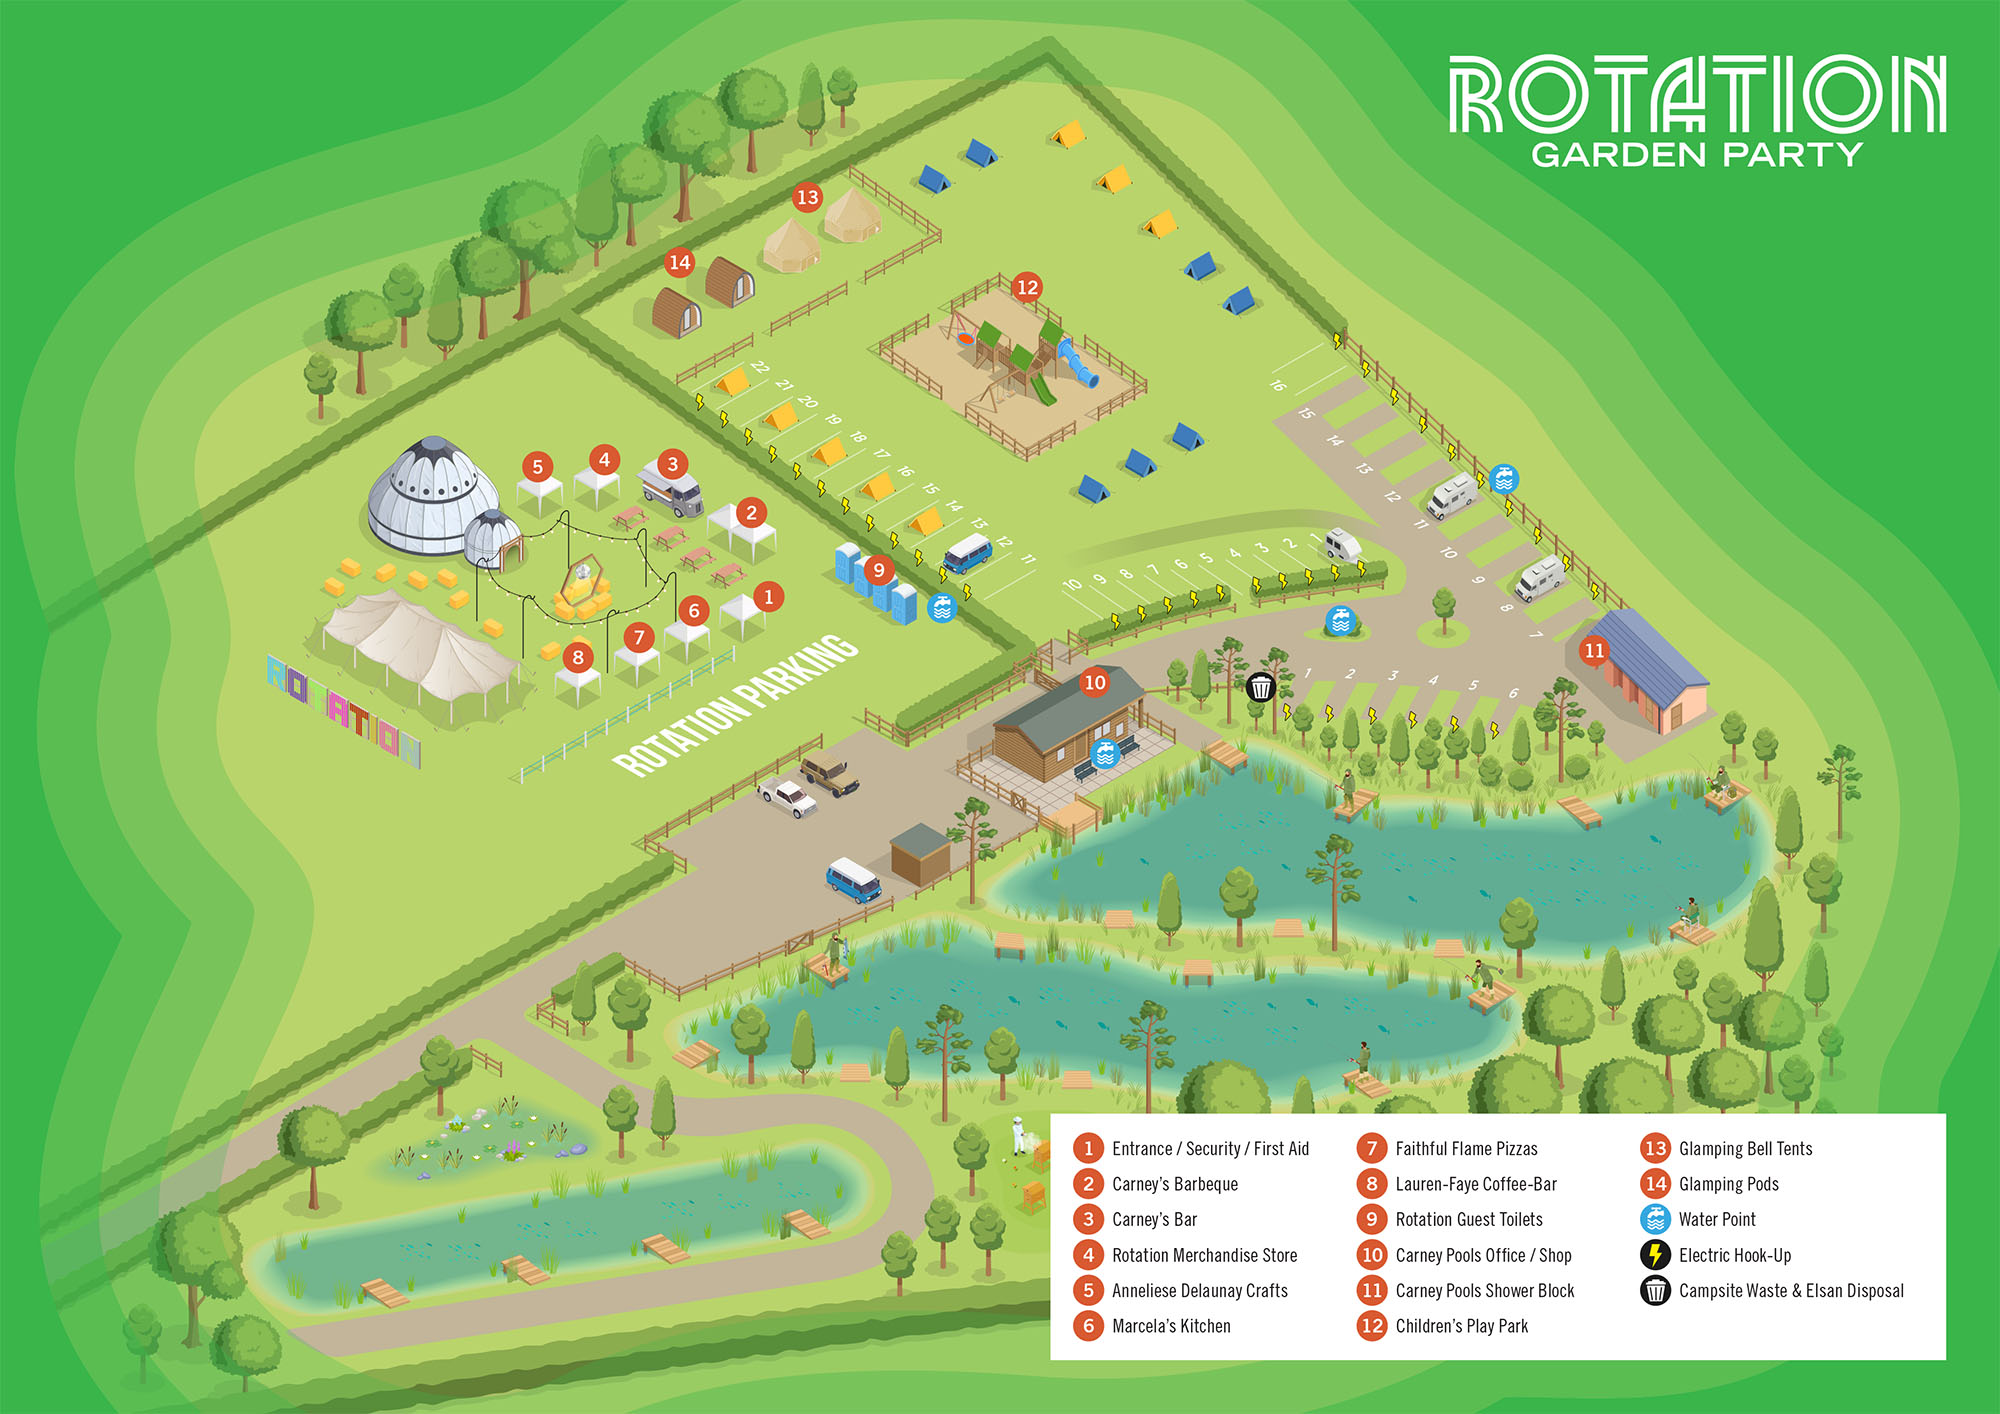 Rotation Garden Party Site Map